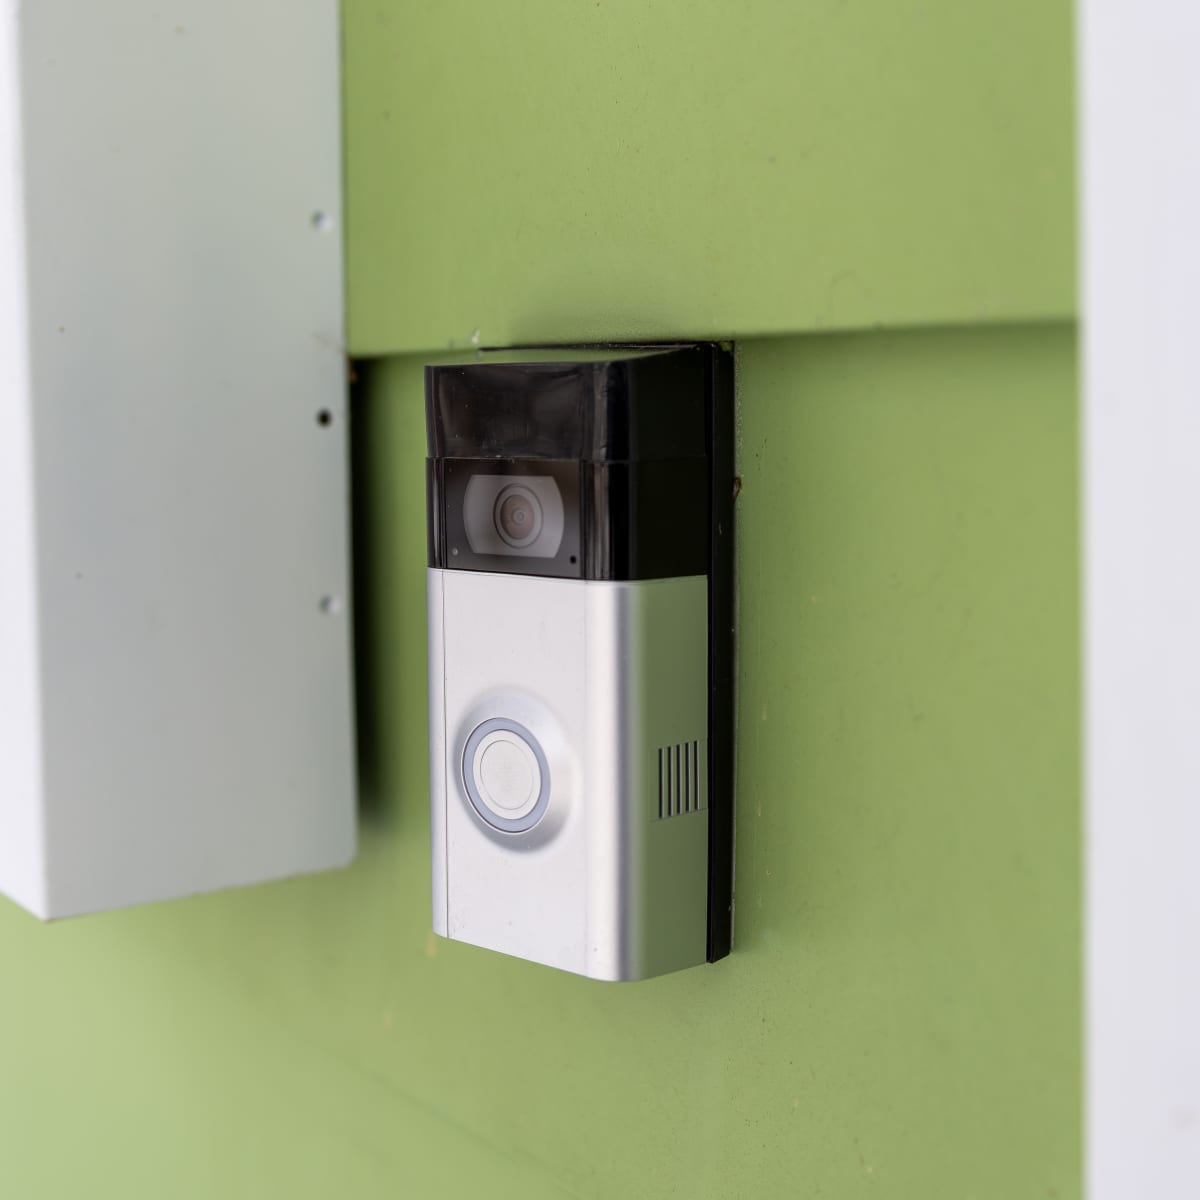 Our Nest Doorbell (wired) rings softly (no one at door) : r/Nest